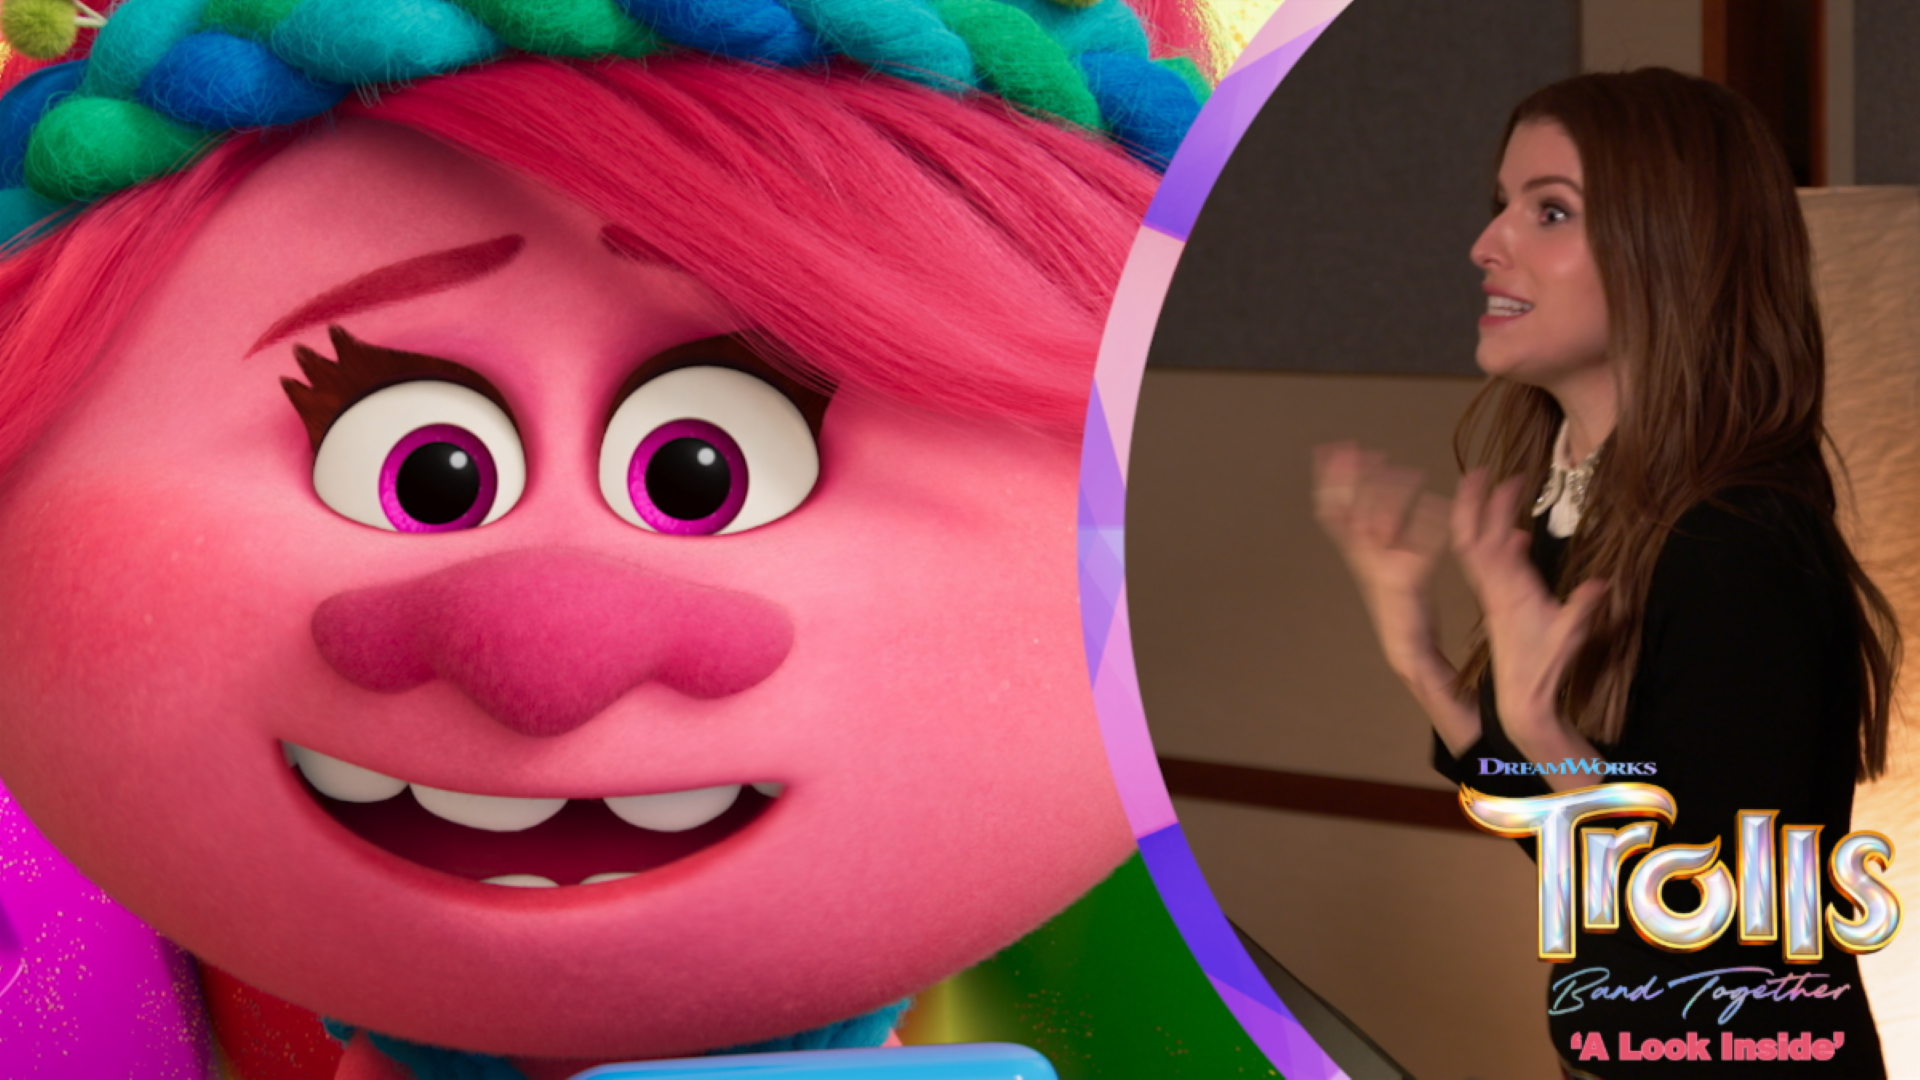 TROLLS BAND TOGETHER Drops “A Behind-the-Scenes Look” at the Upcoming Vibrant Cinematic Joy Bomb